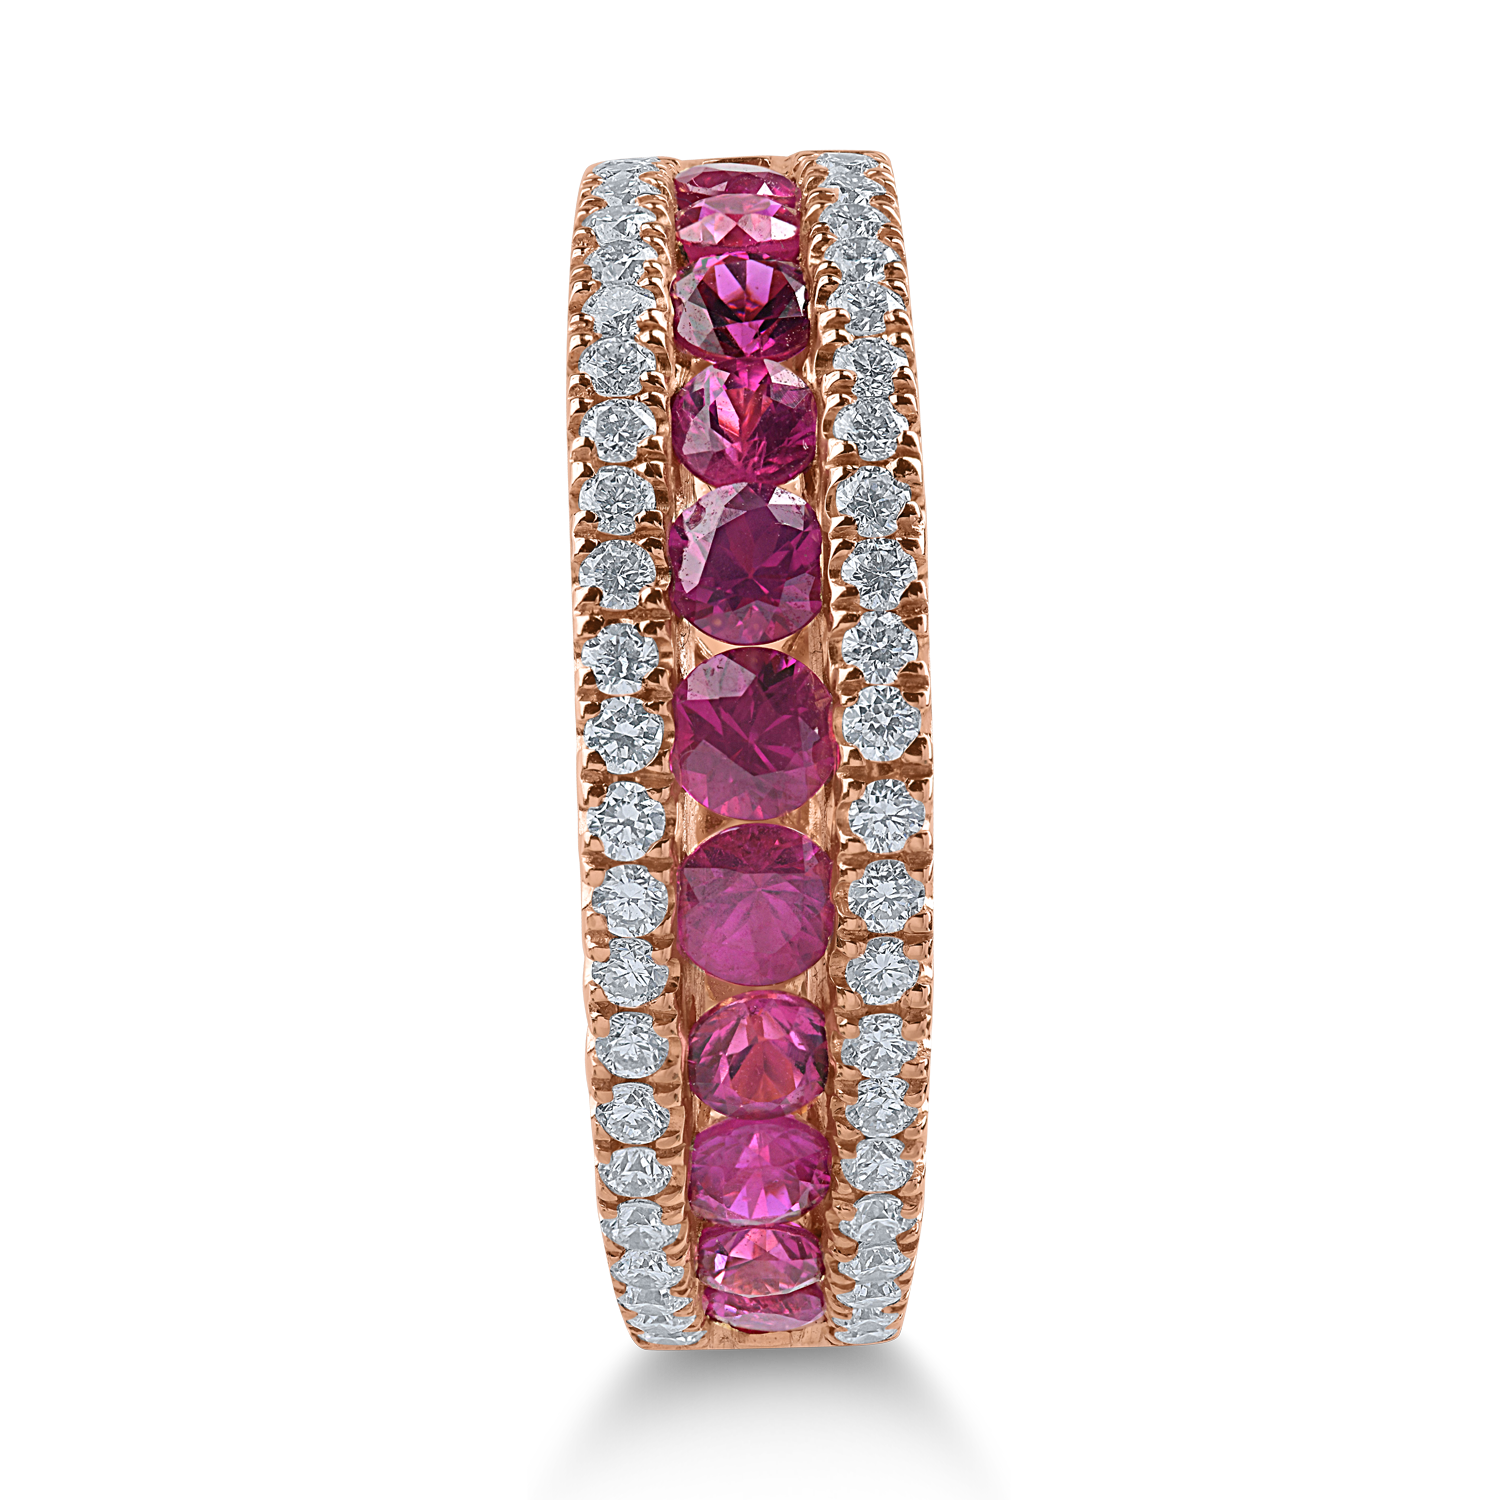 Half eternity ring in rose gold with 1.19ct rubies and 0.4ct diamonds